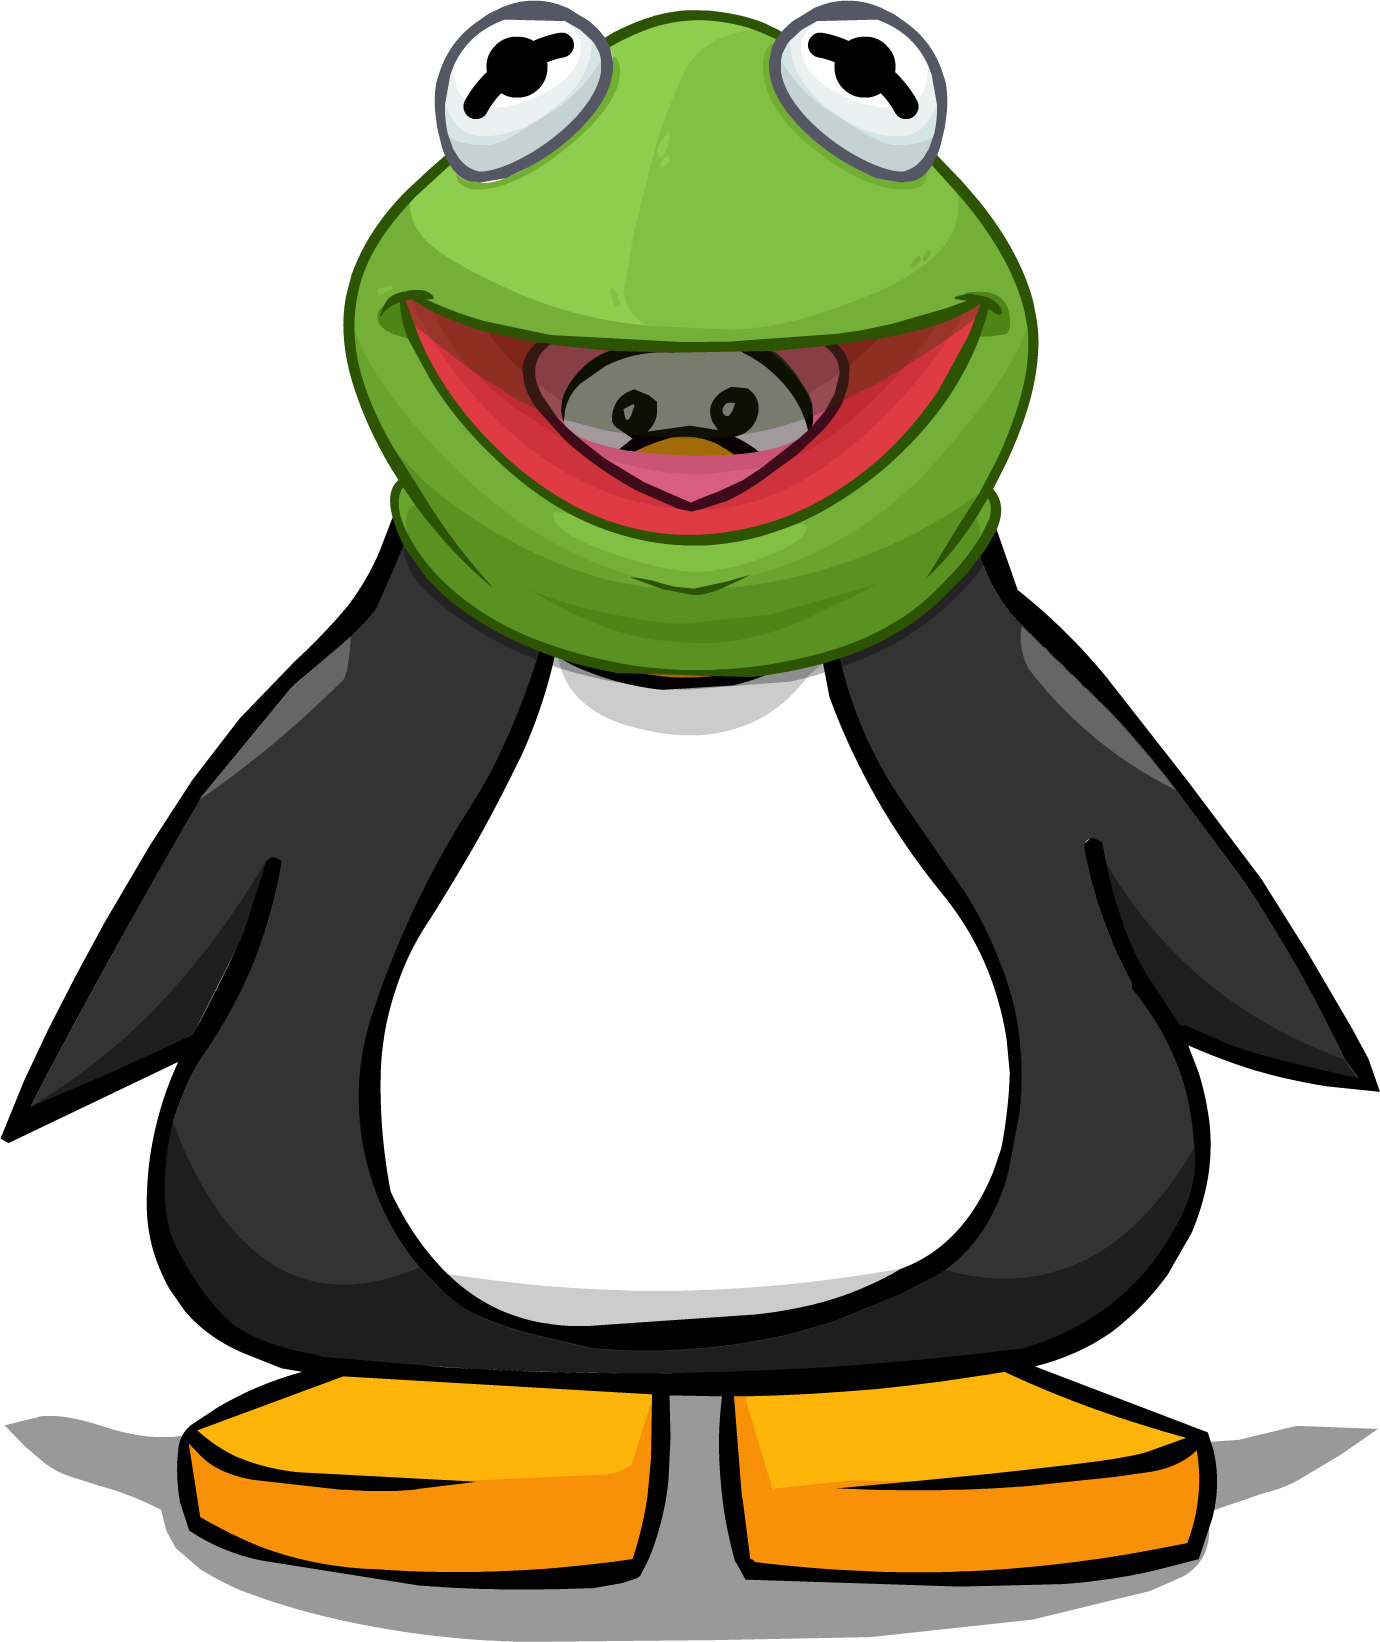 Kermit The Frog Head From A Player Card - Club Penguin With Hat (1380x1642)